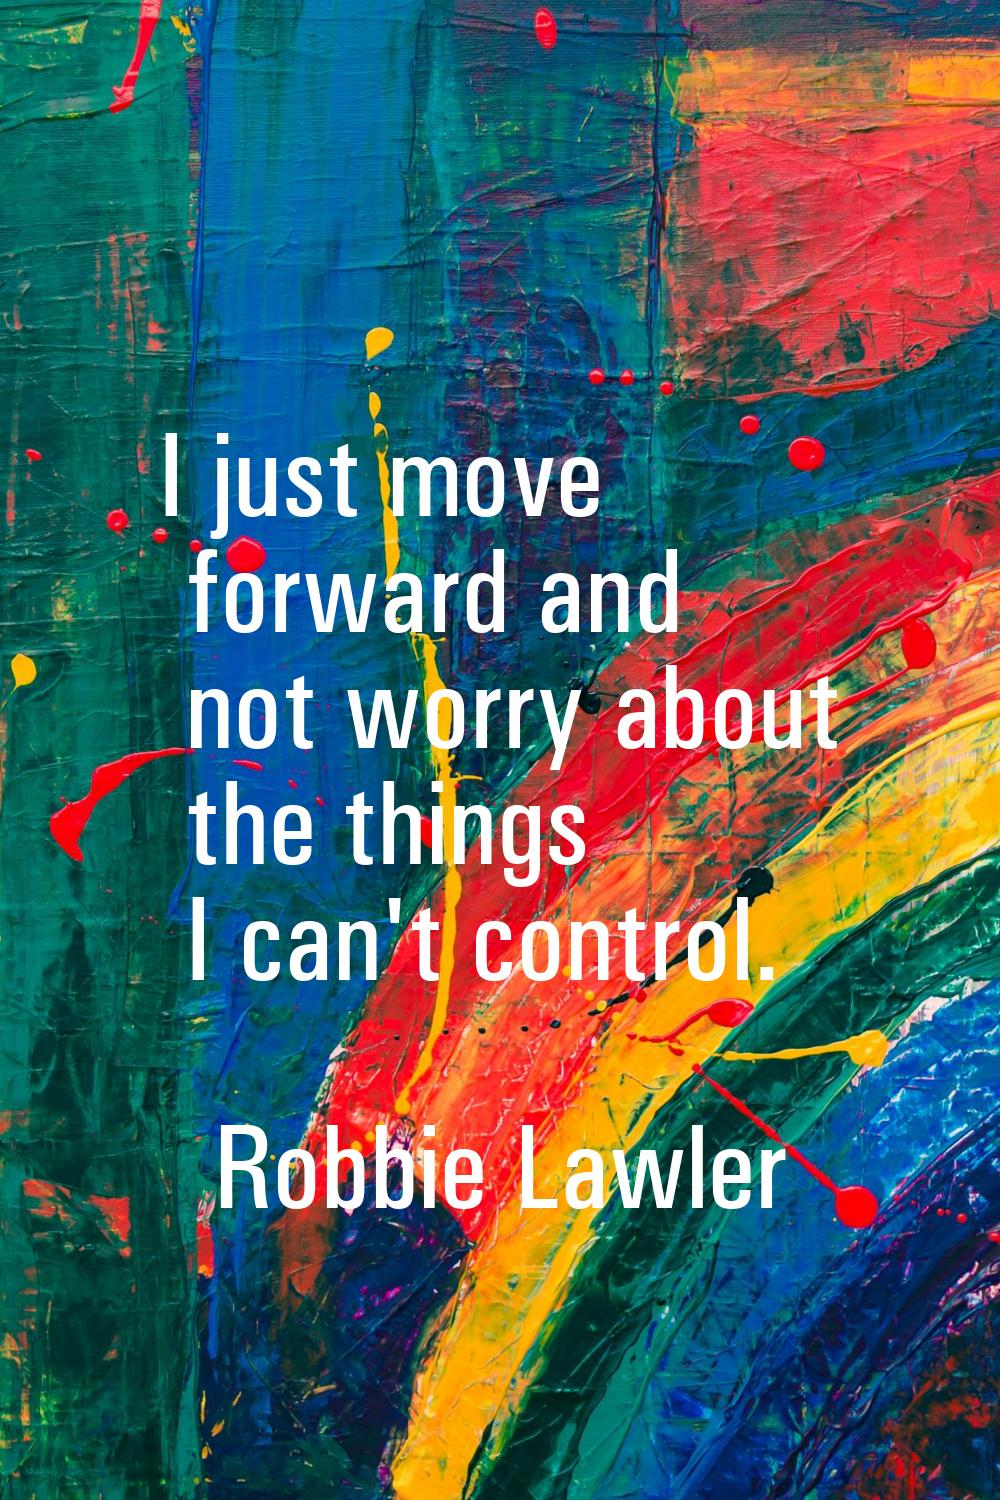 I just move forward and not worry about the things I can't control.